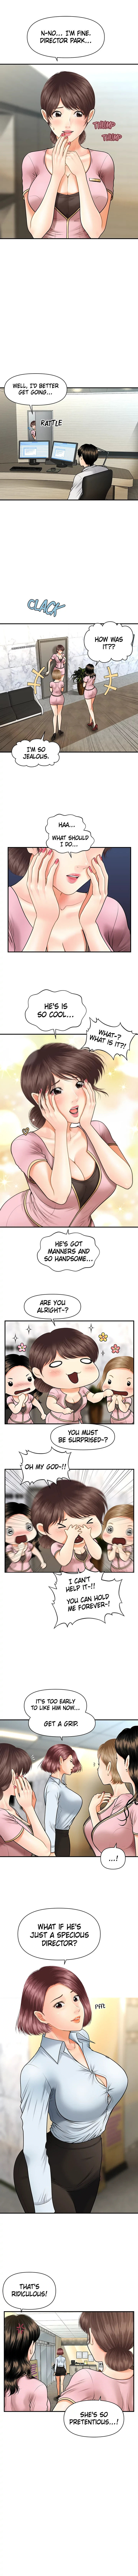 You’re so Handsome - Chapter 5 Page 6